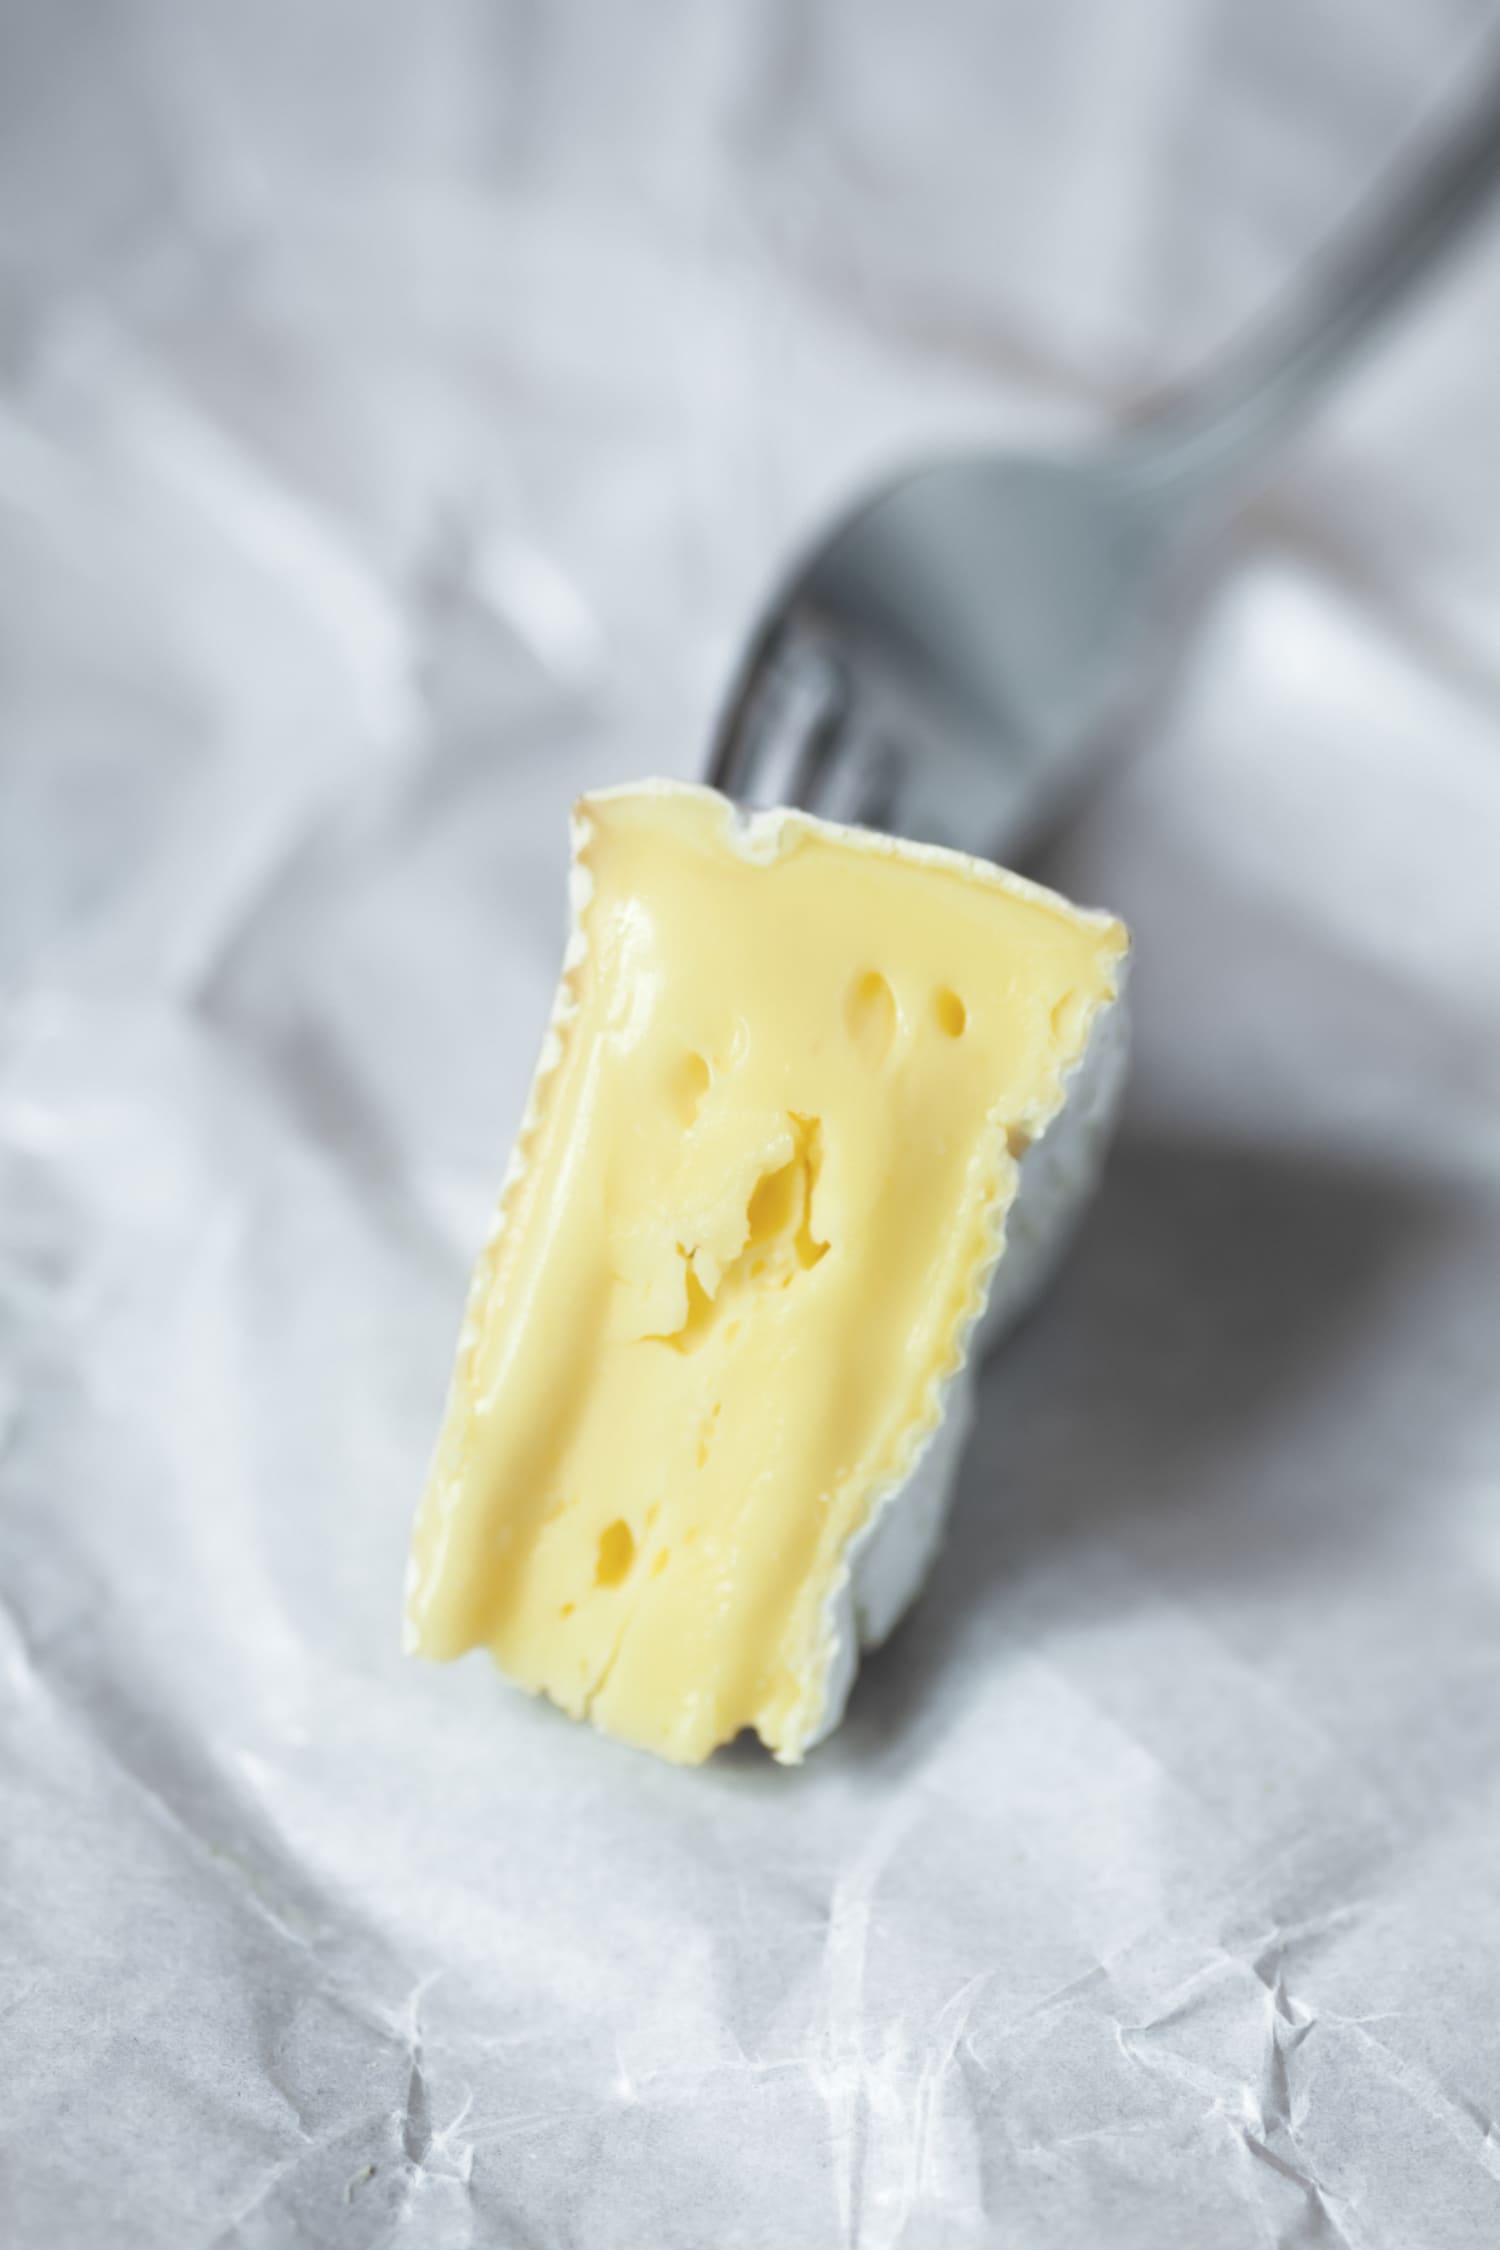 Brie and Camembert Cheeses Are Being Recalled Nationwide — Here’s What You Need to Know